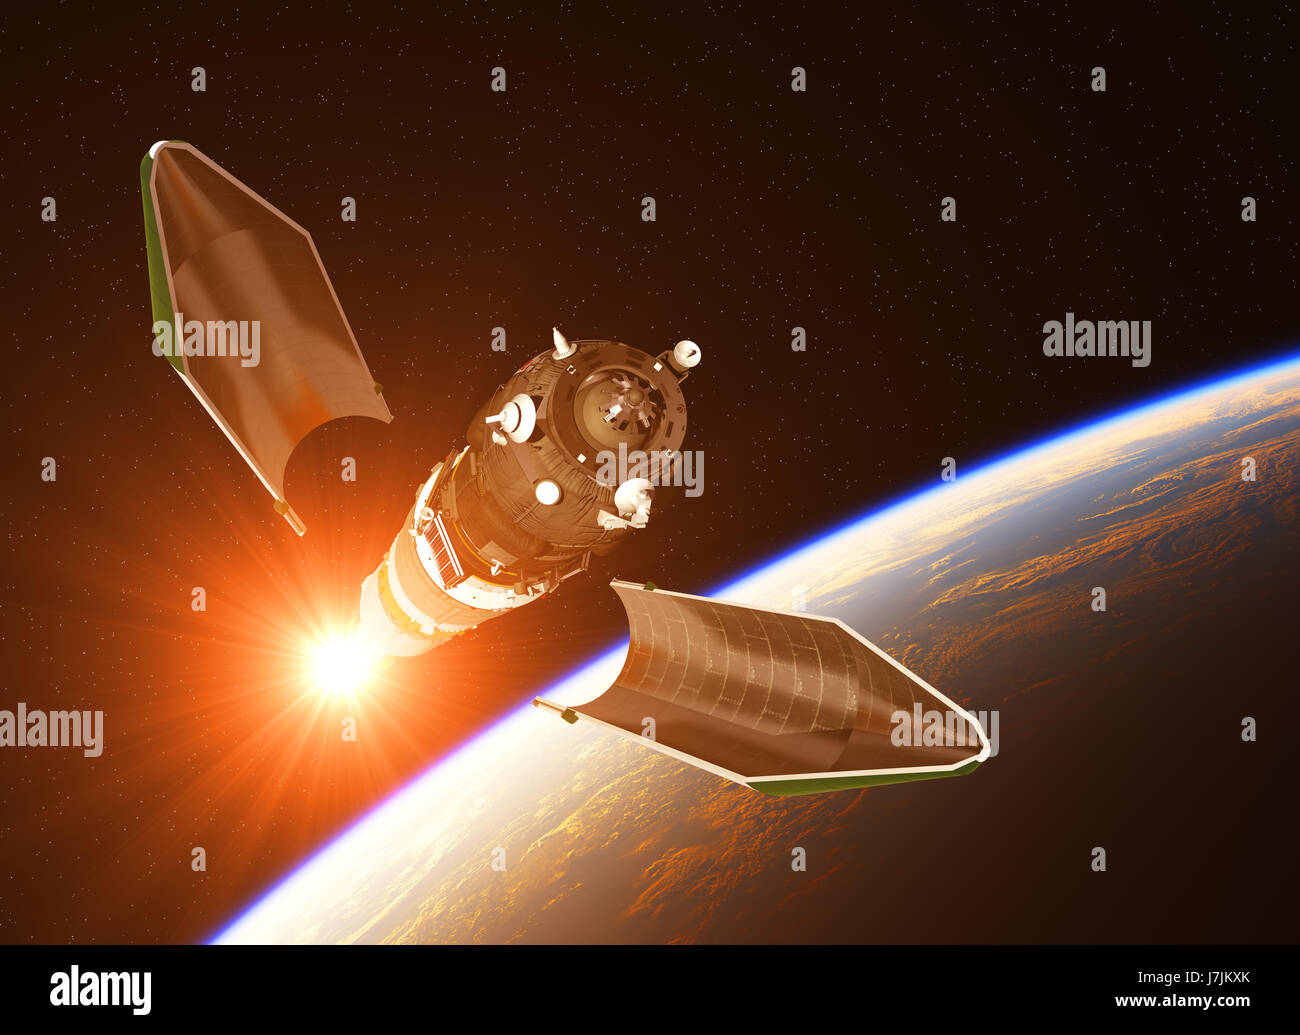 Launch Of Cargo Spacecraft On Background Of Rising Sun. 3D Illustration. Stock Photo